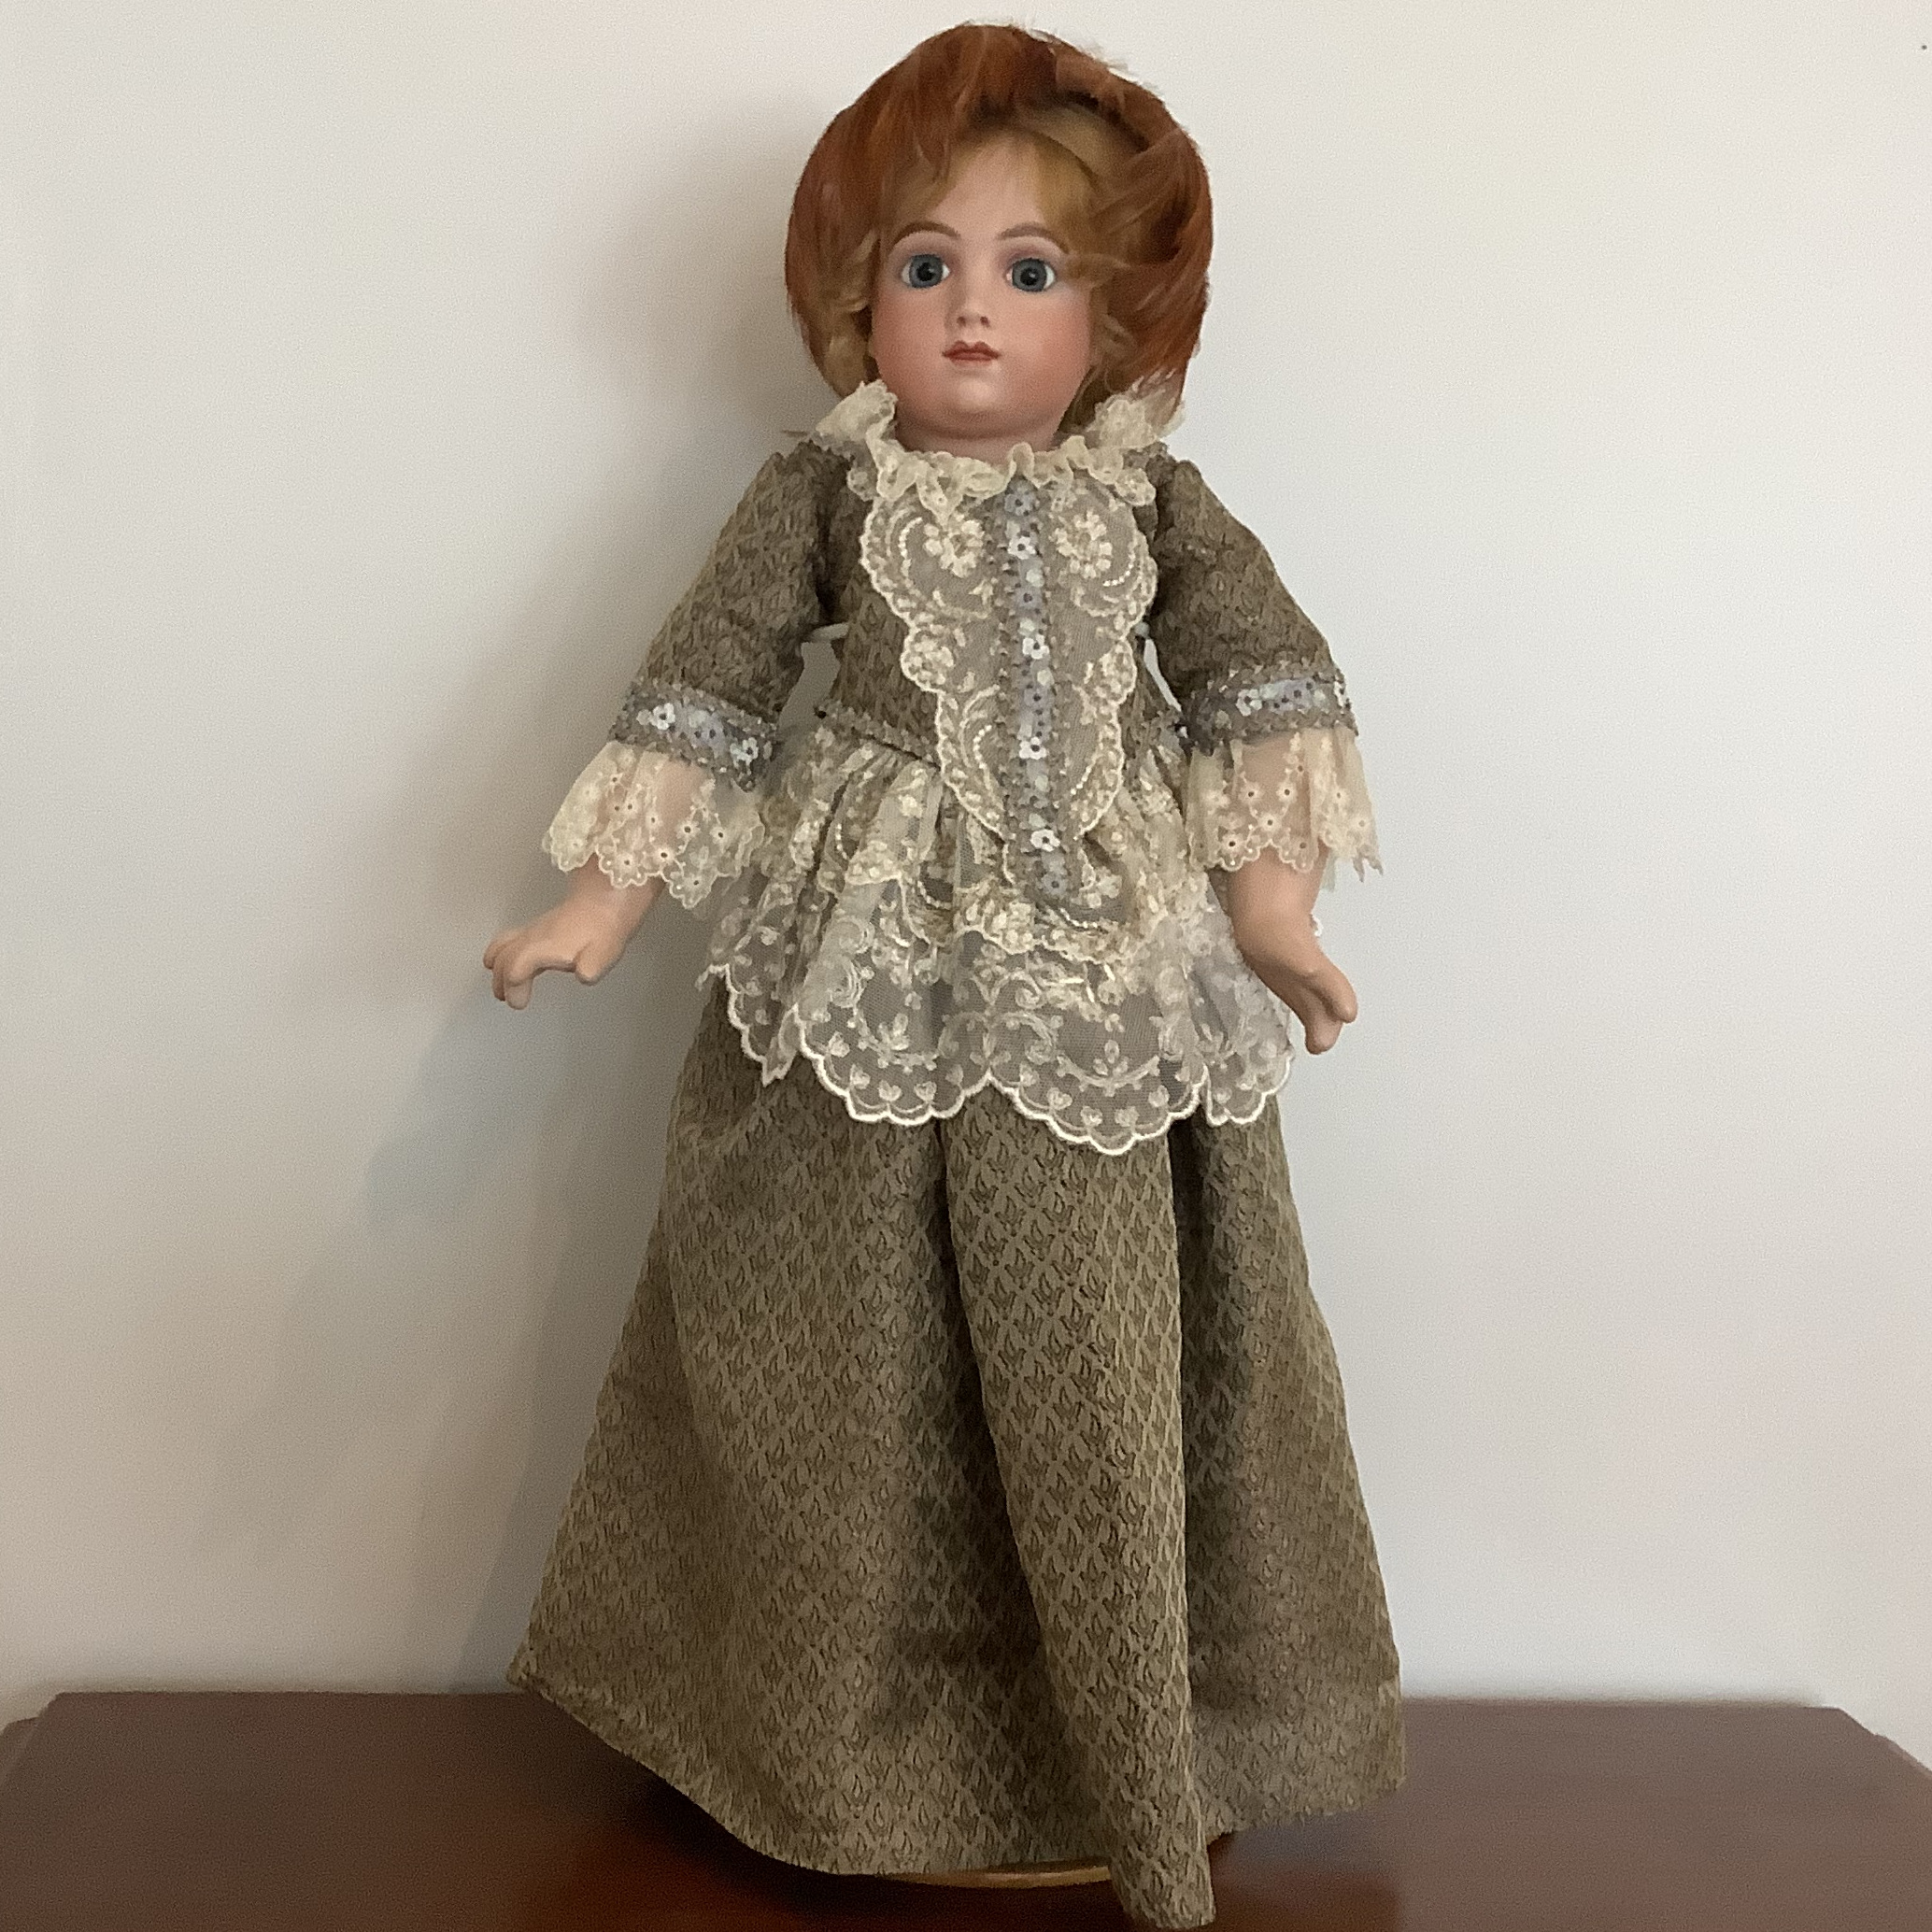 Reproduction AT doll in green and white silk dress with extensive lace trim and feathered fascinator hat, front view